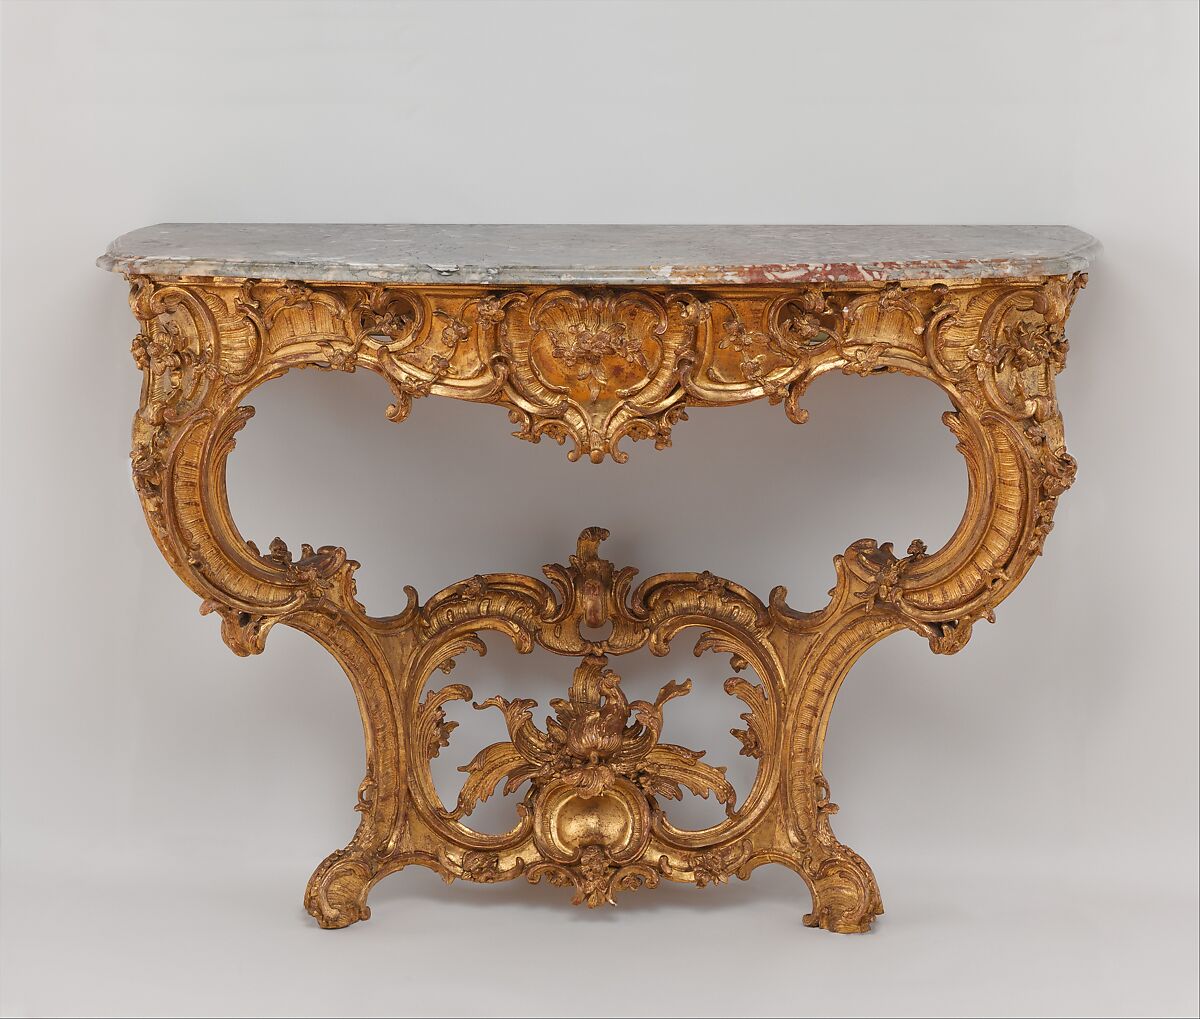 Console table, Carved and gilded oak and limewood; legs and apron of oak; double stretcher of linden wood; greenish gray and reddish brecciated marble top, German, Bayreuth 